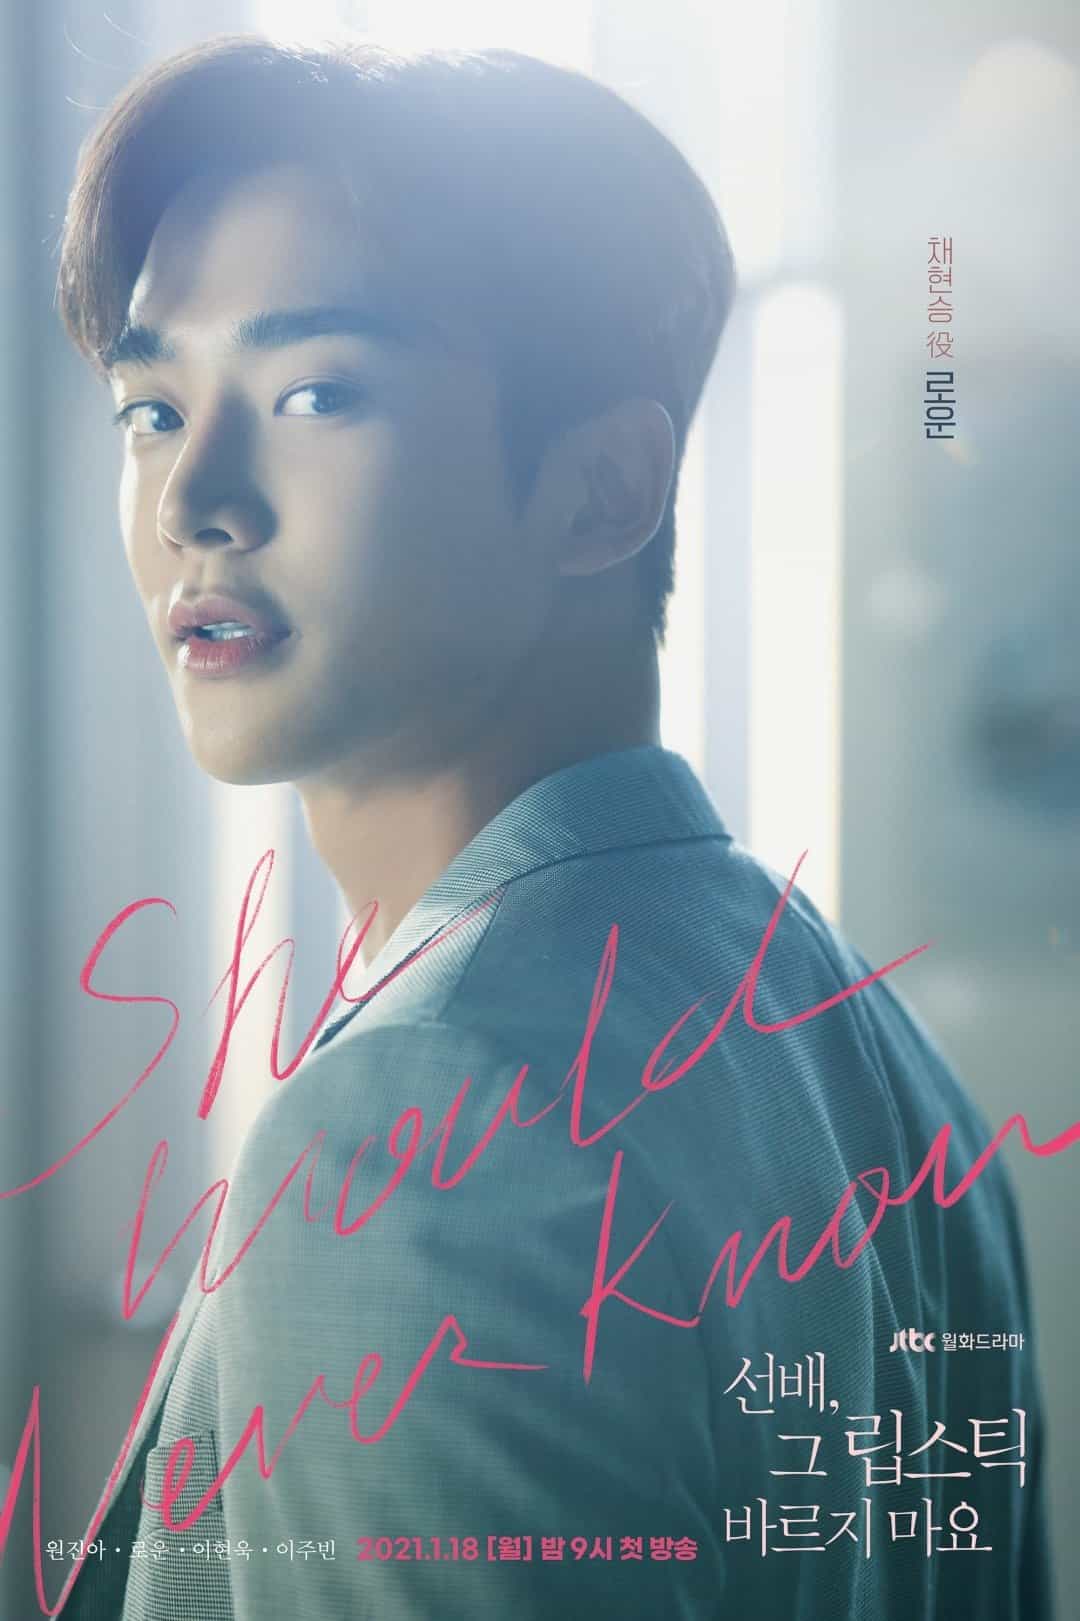 She Would Never Know - Cast, Summary, Synopsis, OST, Episode, Review